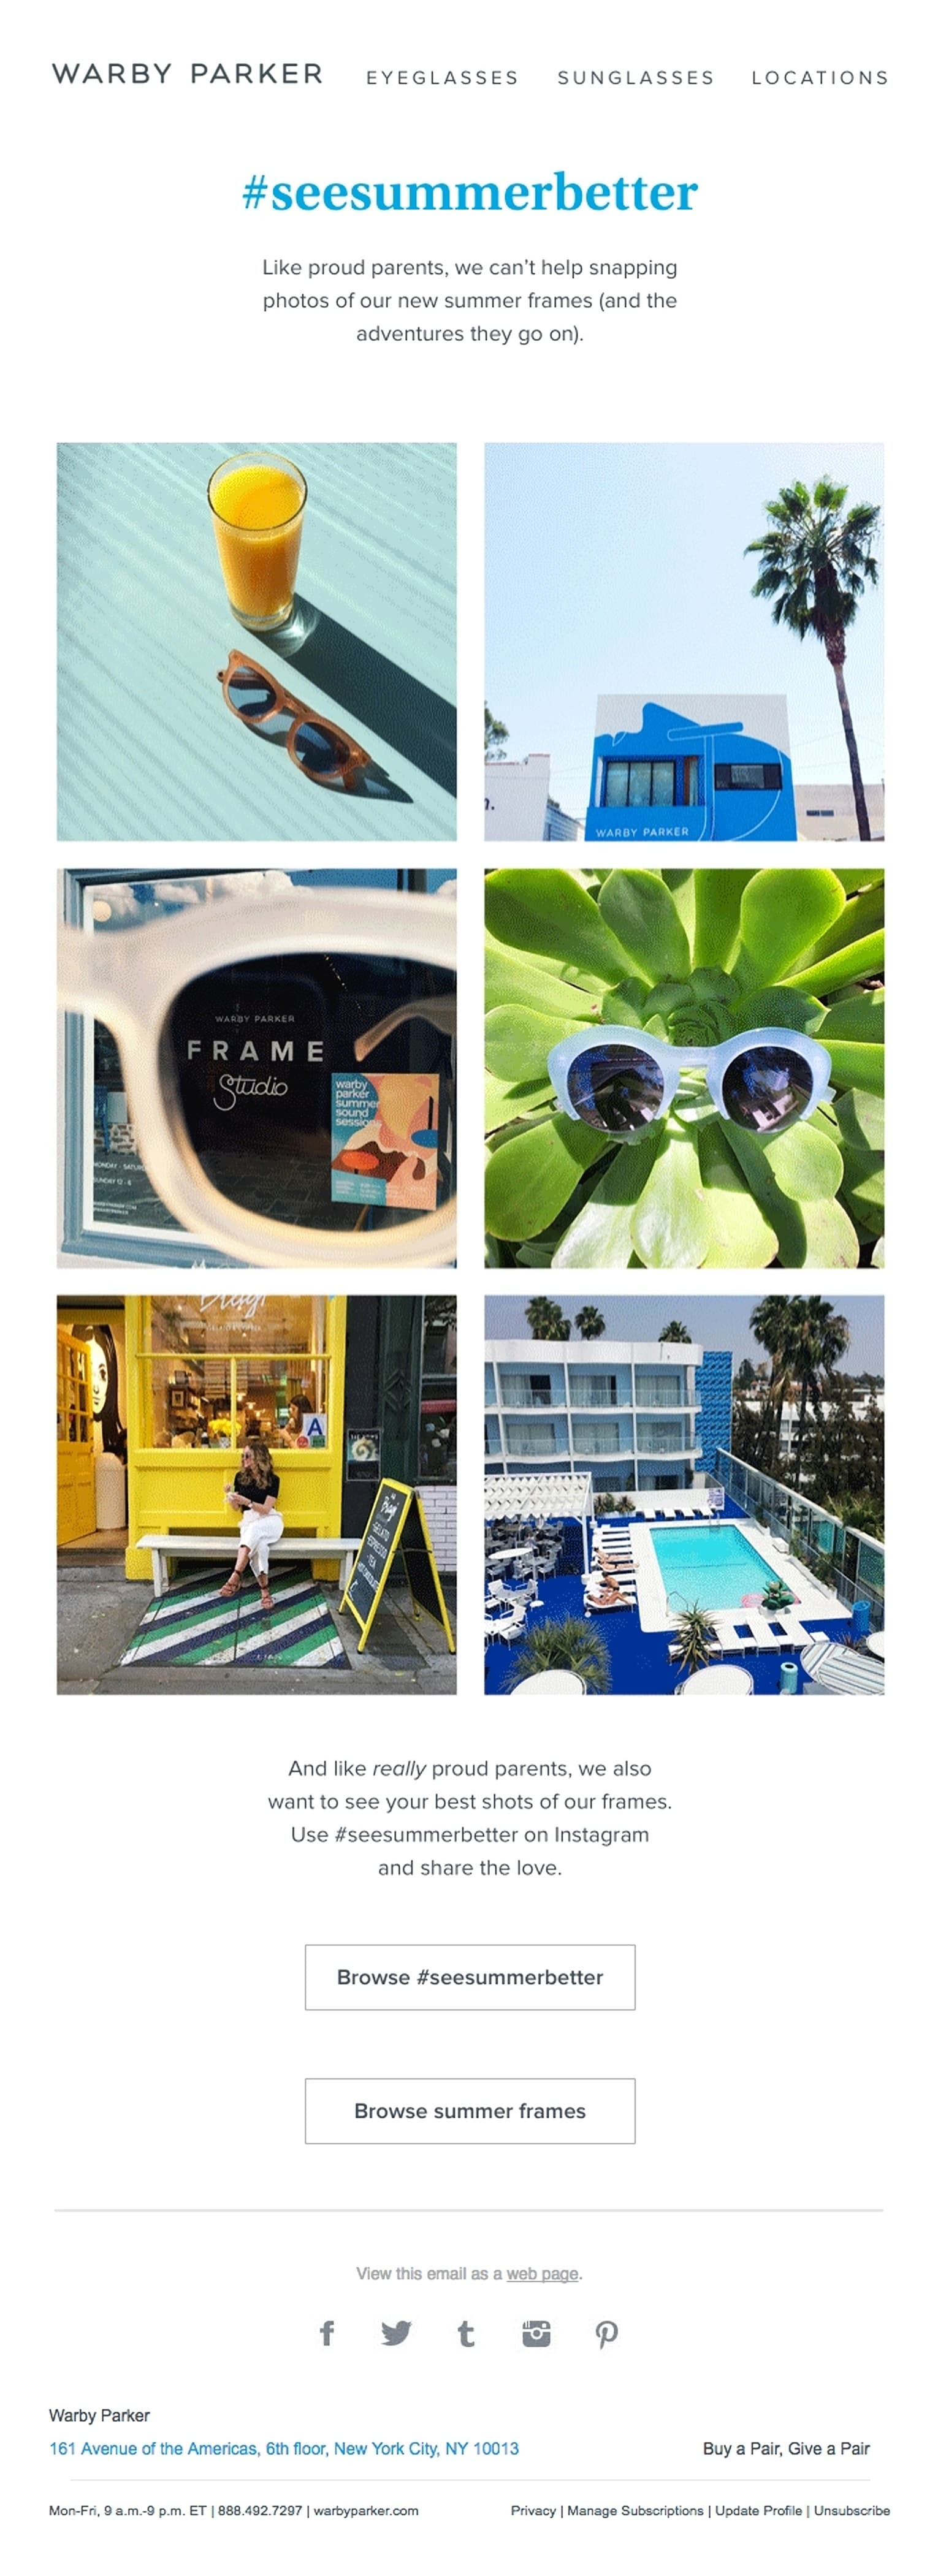  Warby Parker email featuring social media integration